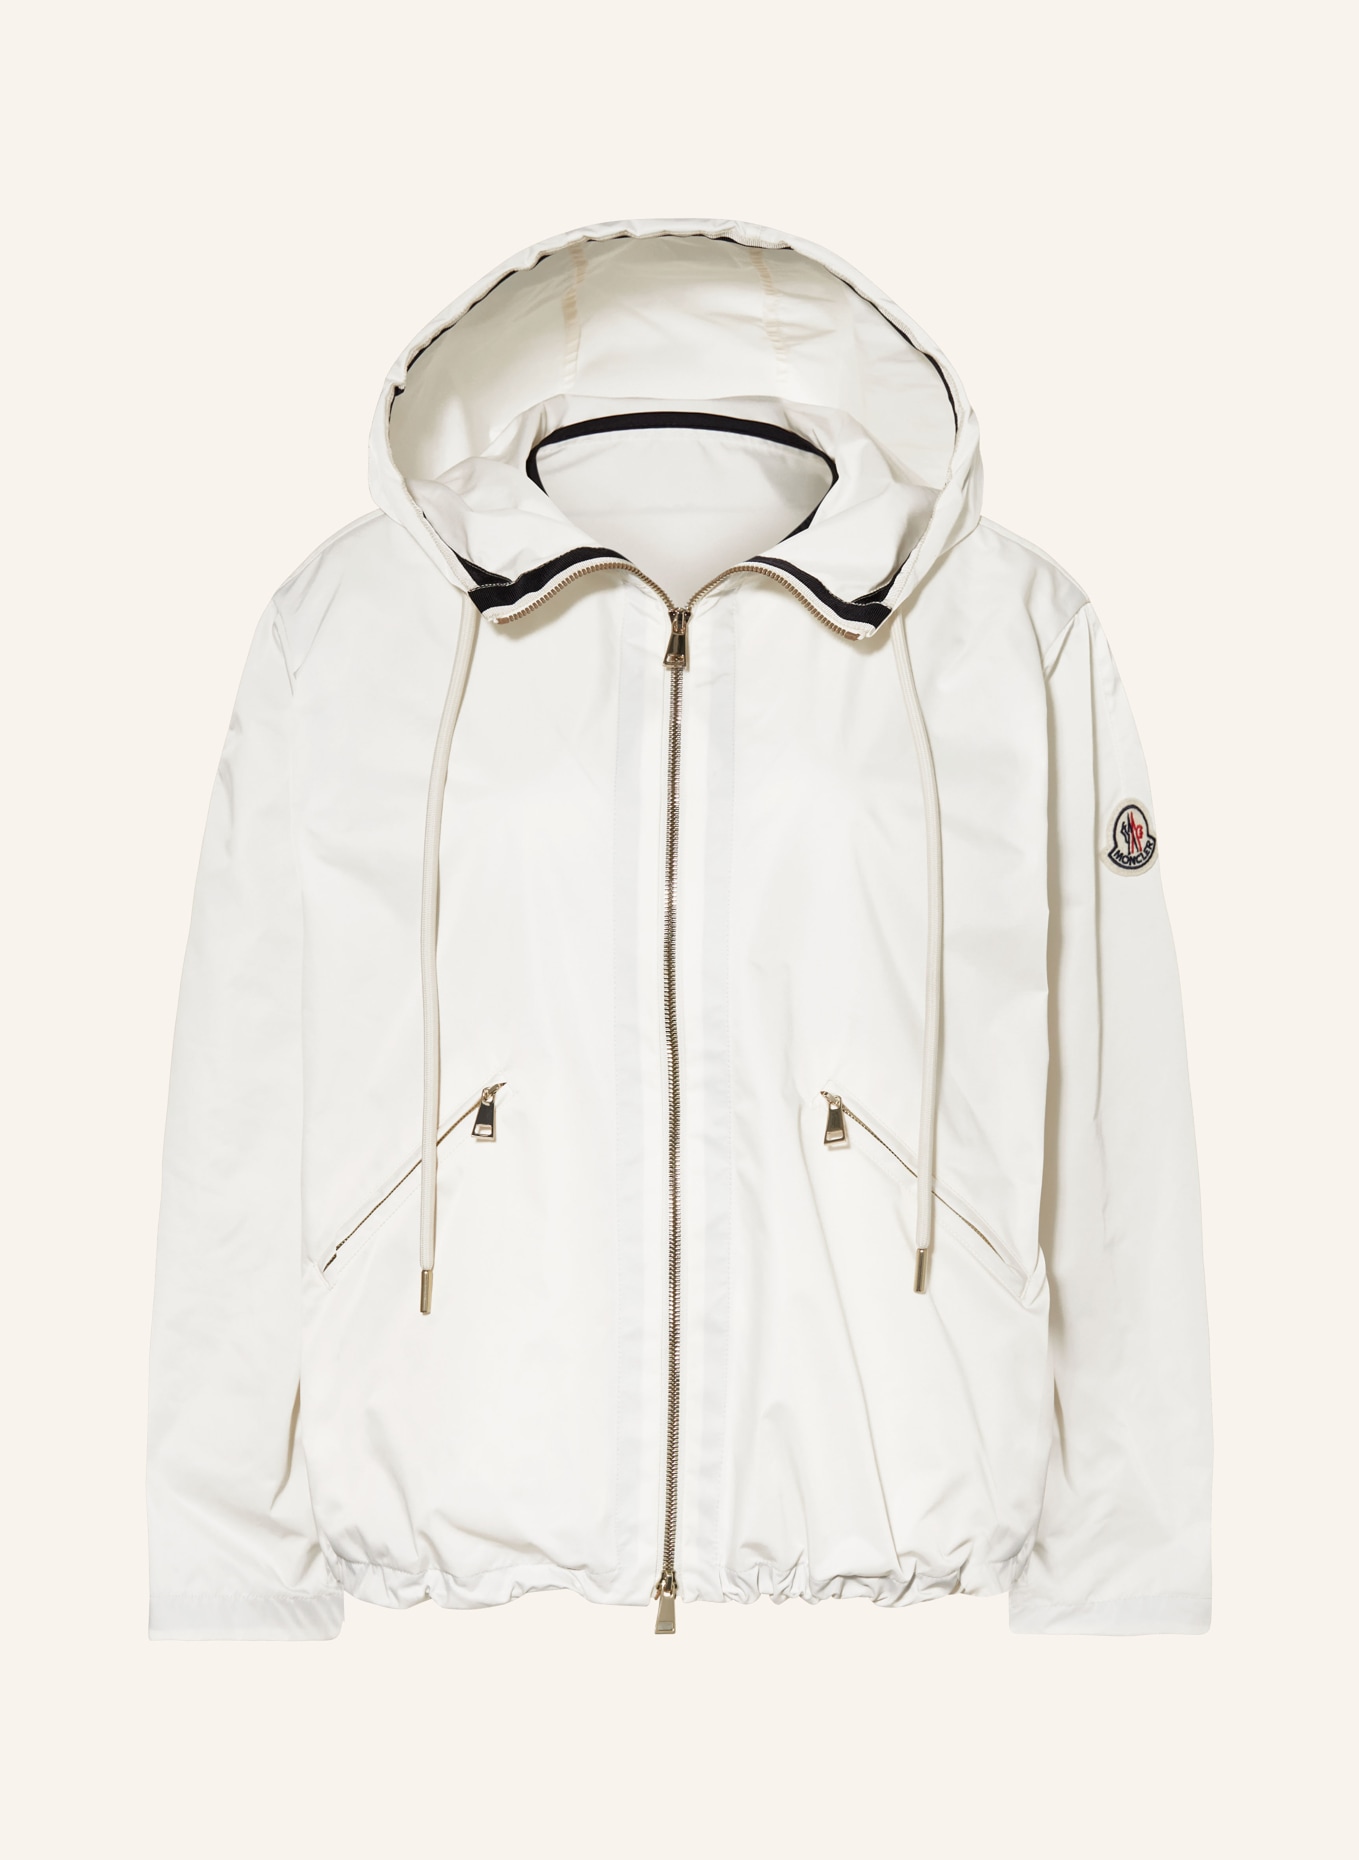 MONCLER Jacke CASSIOPEA, Farbe: WEISS (Bild 1)